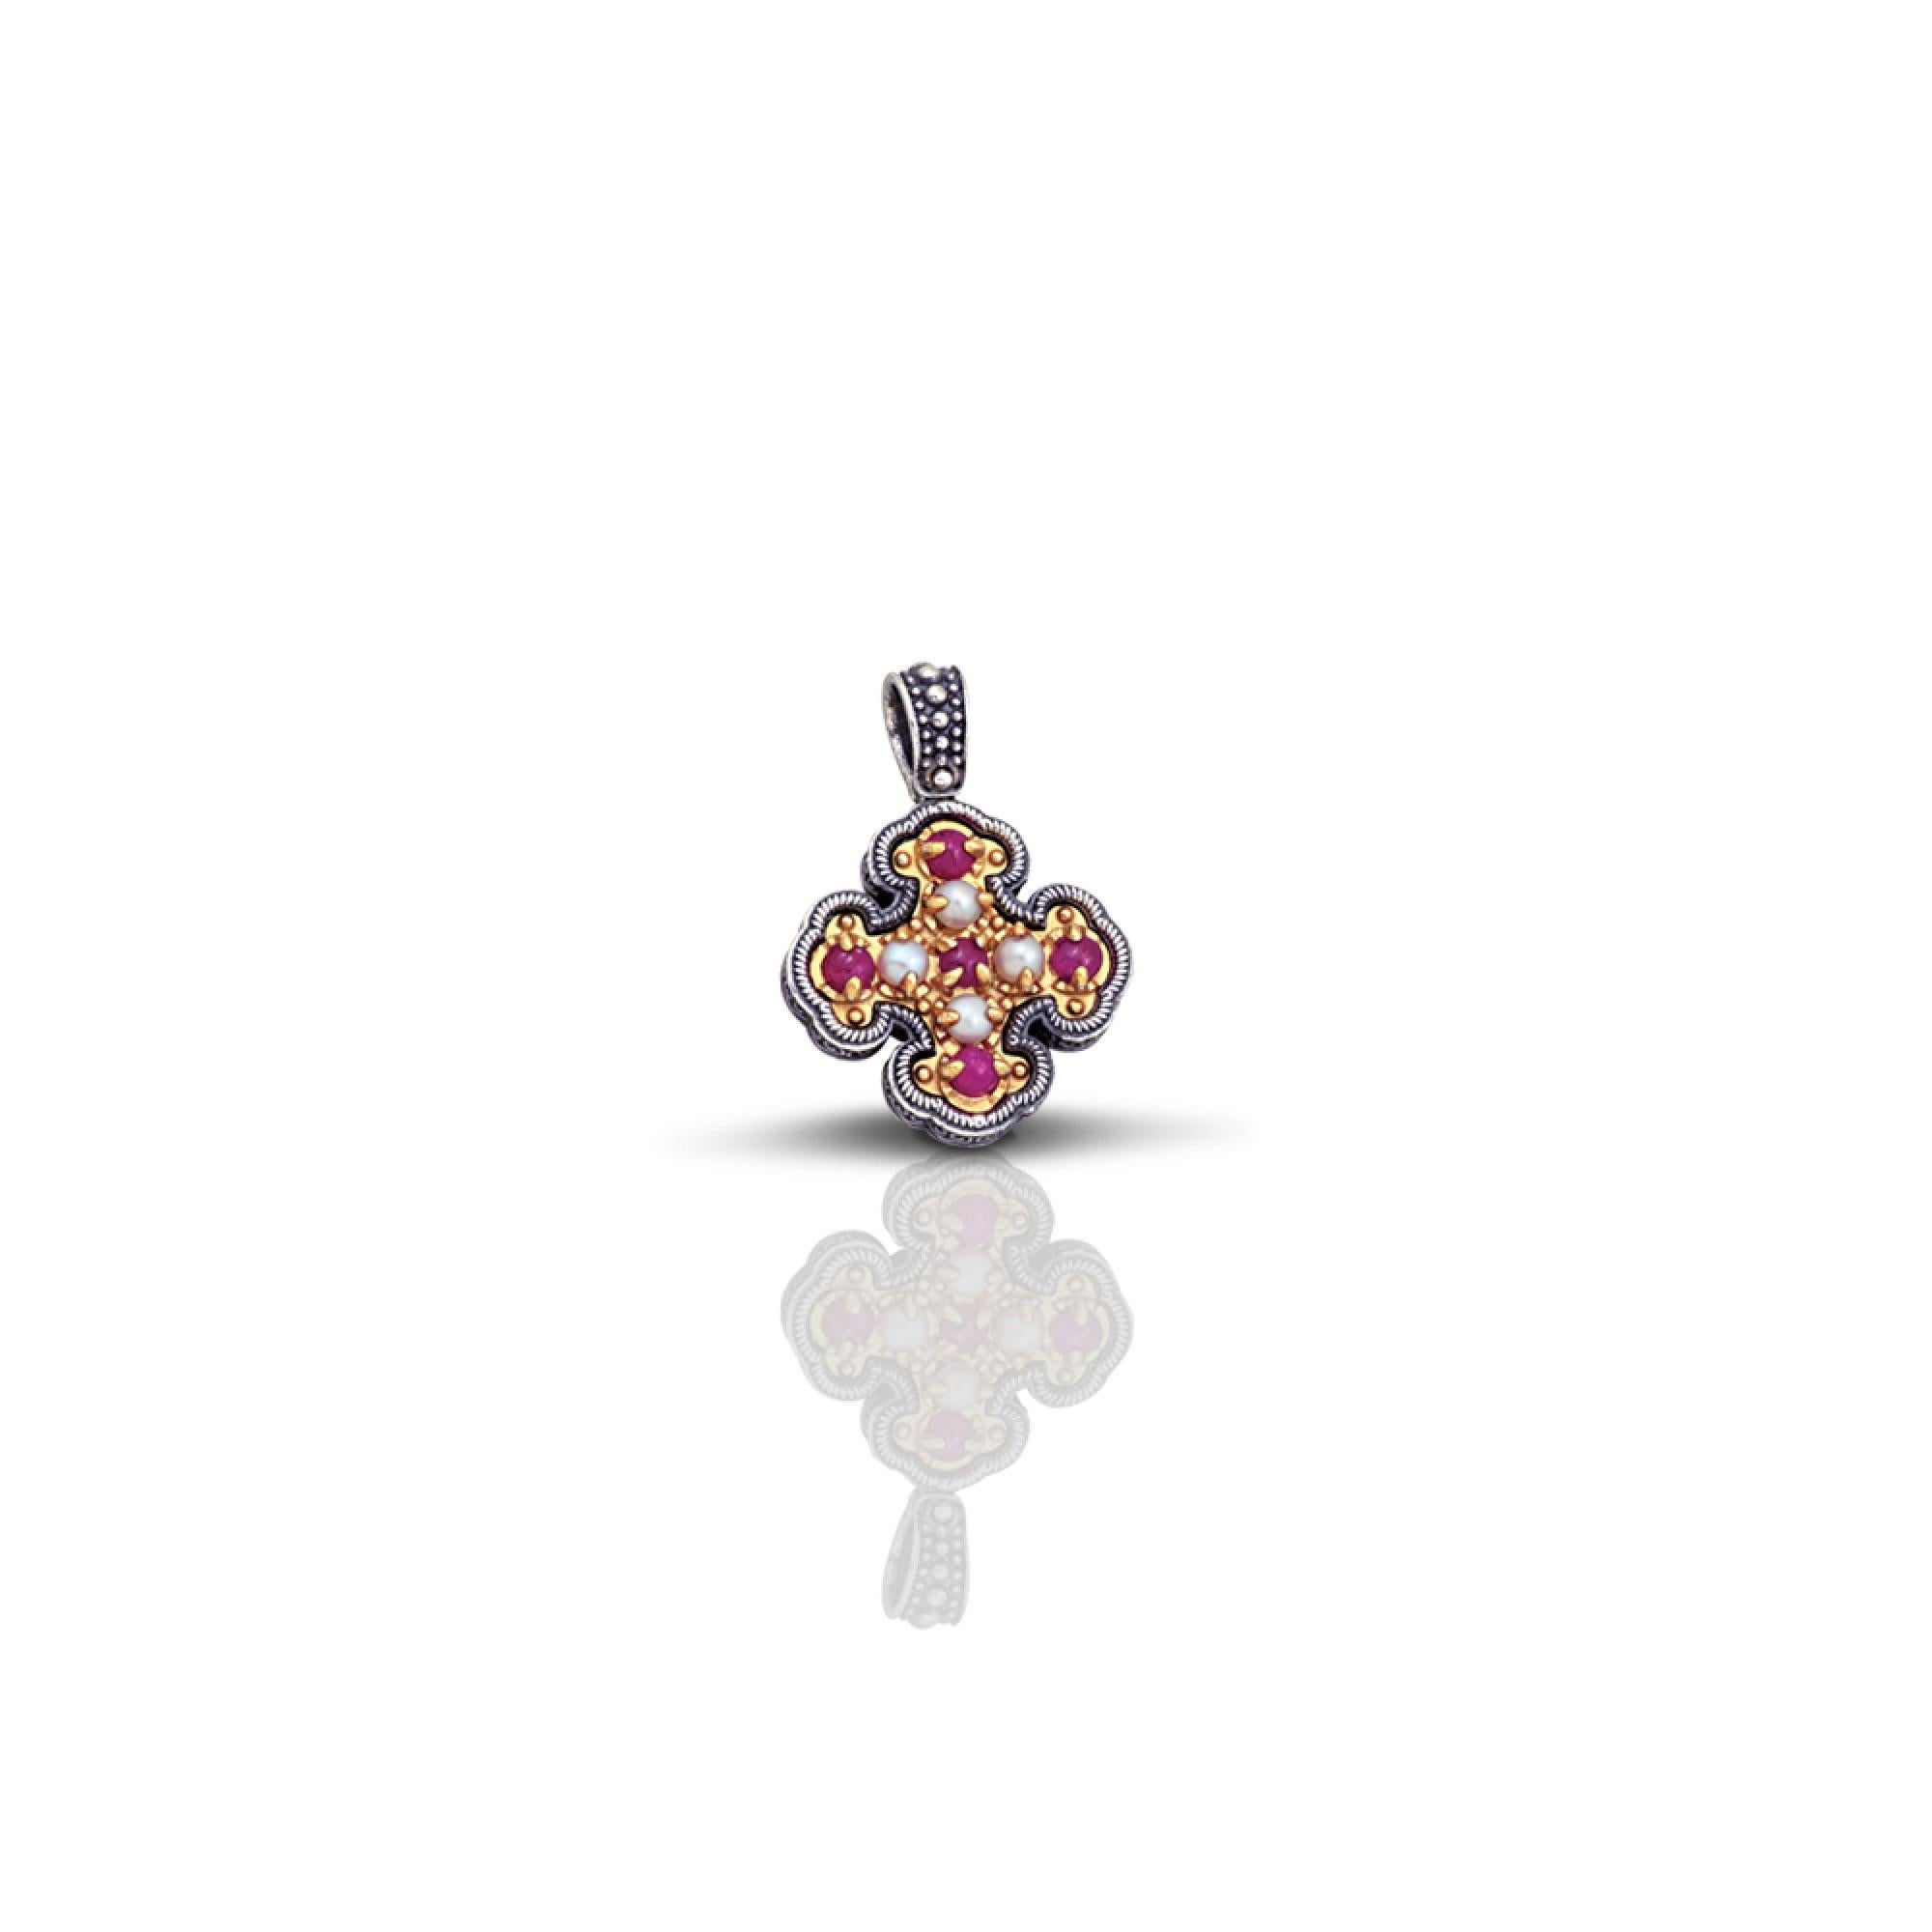 Byzantine Cross Pendant with Rubies and Pearls, Dimitrios Exclusive C8 For Sale